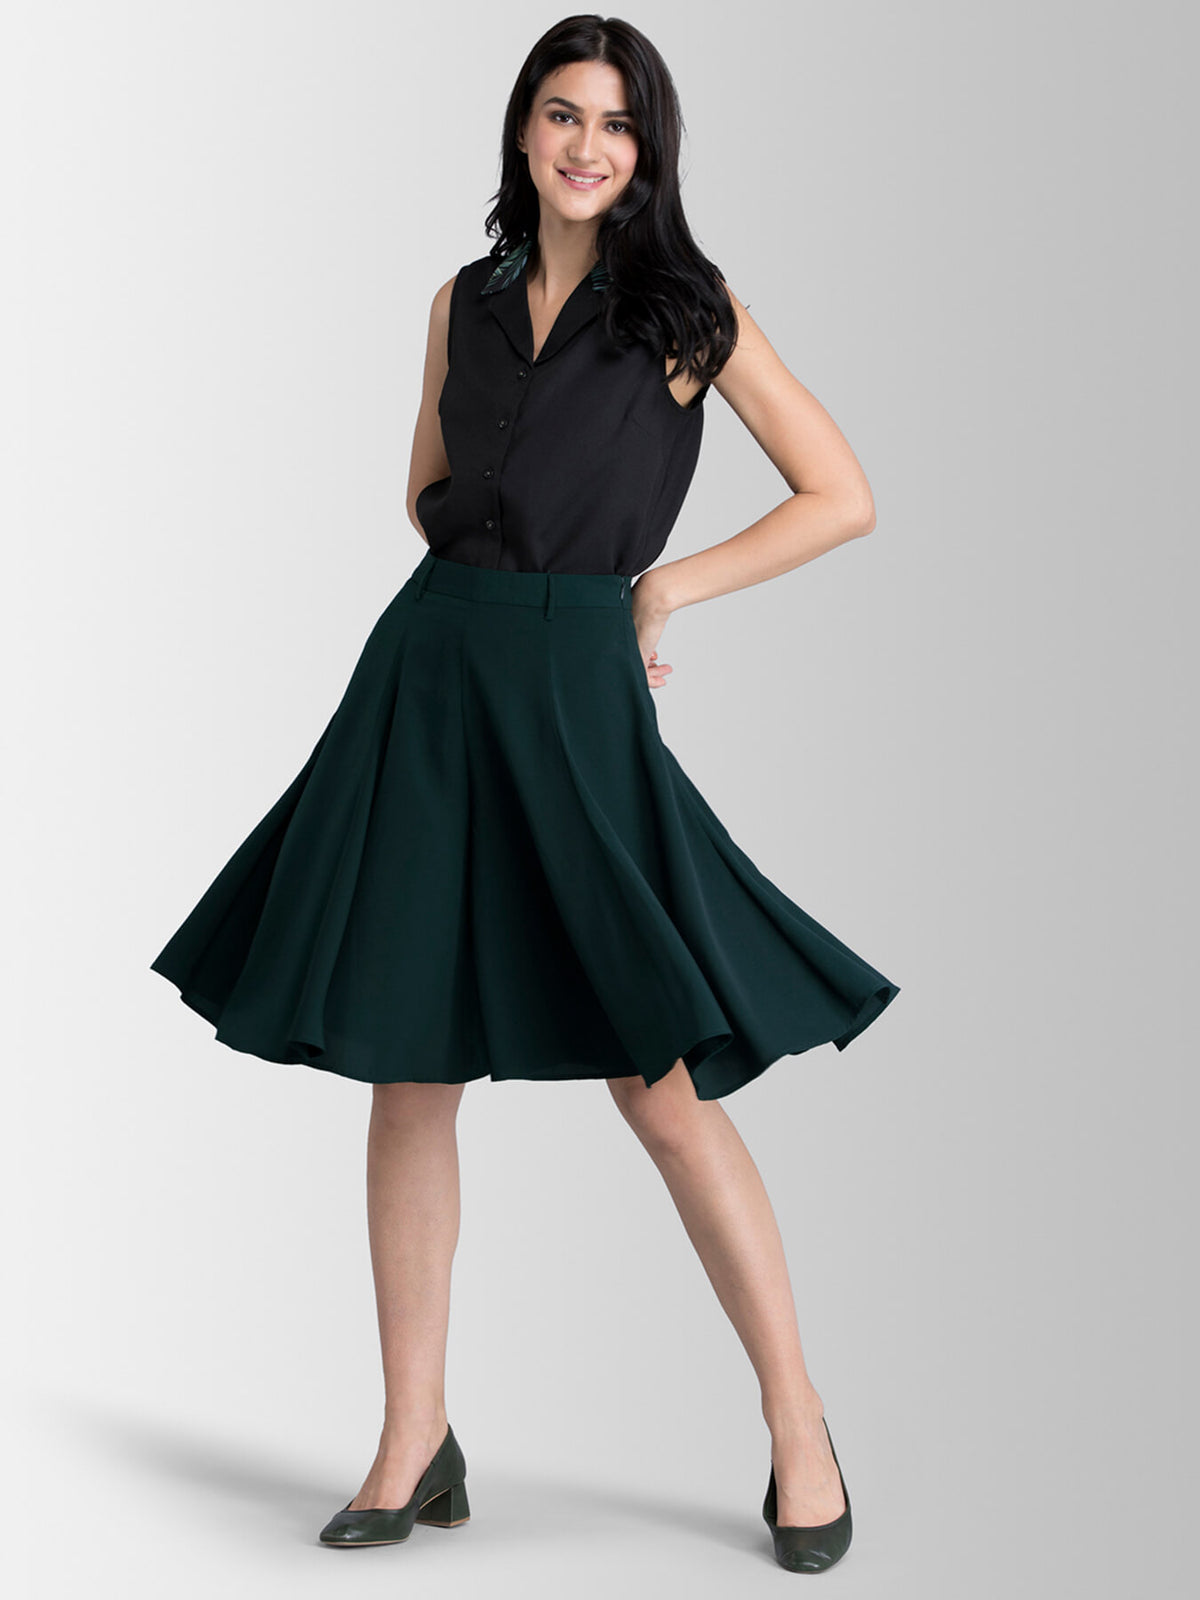 Flared Skort With Panel Detail - Green